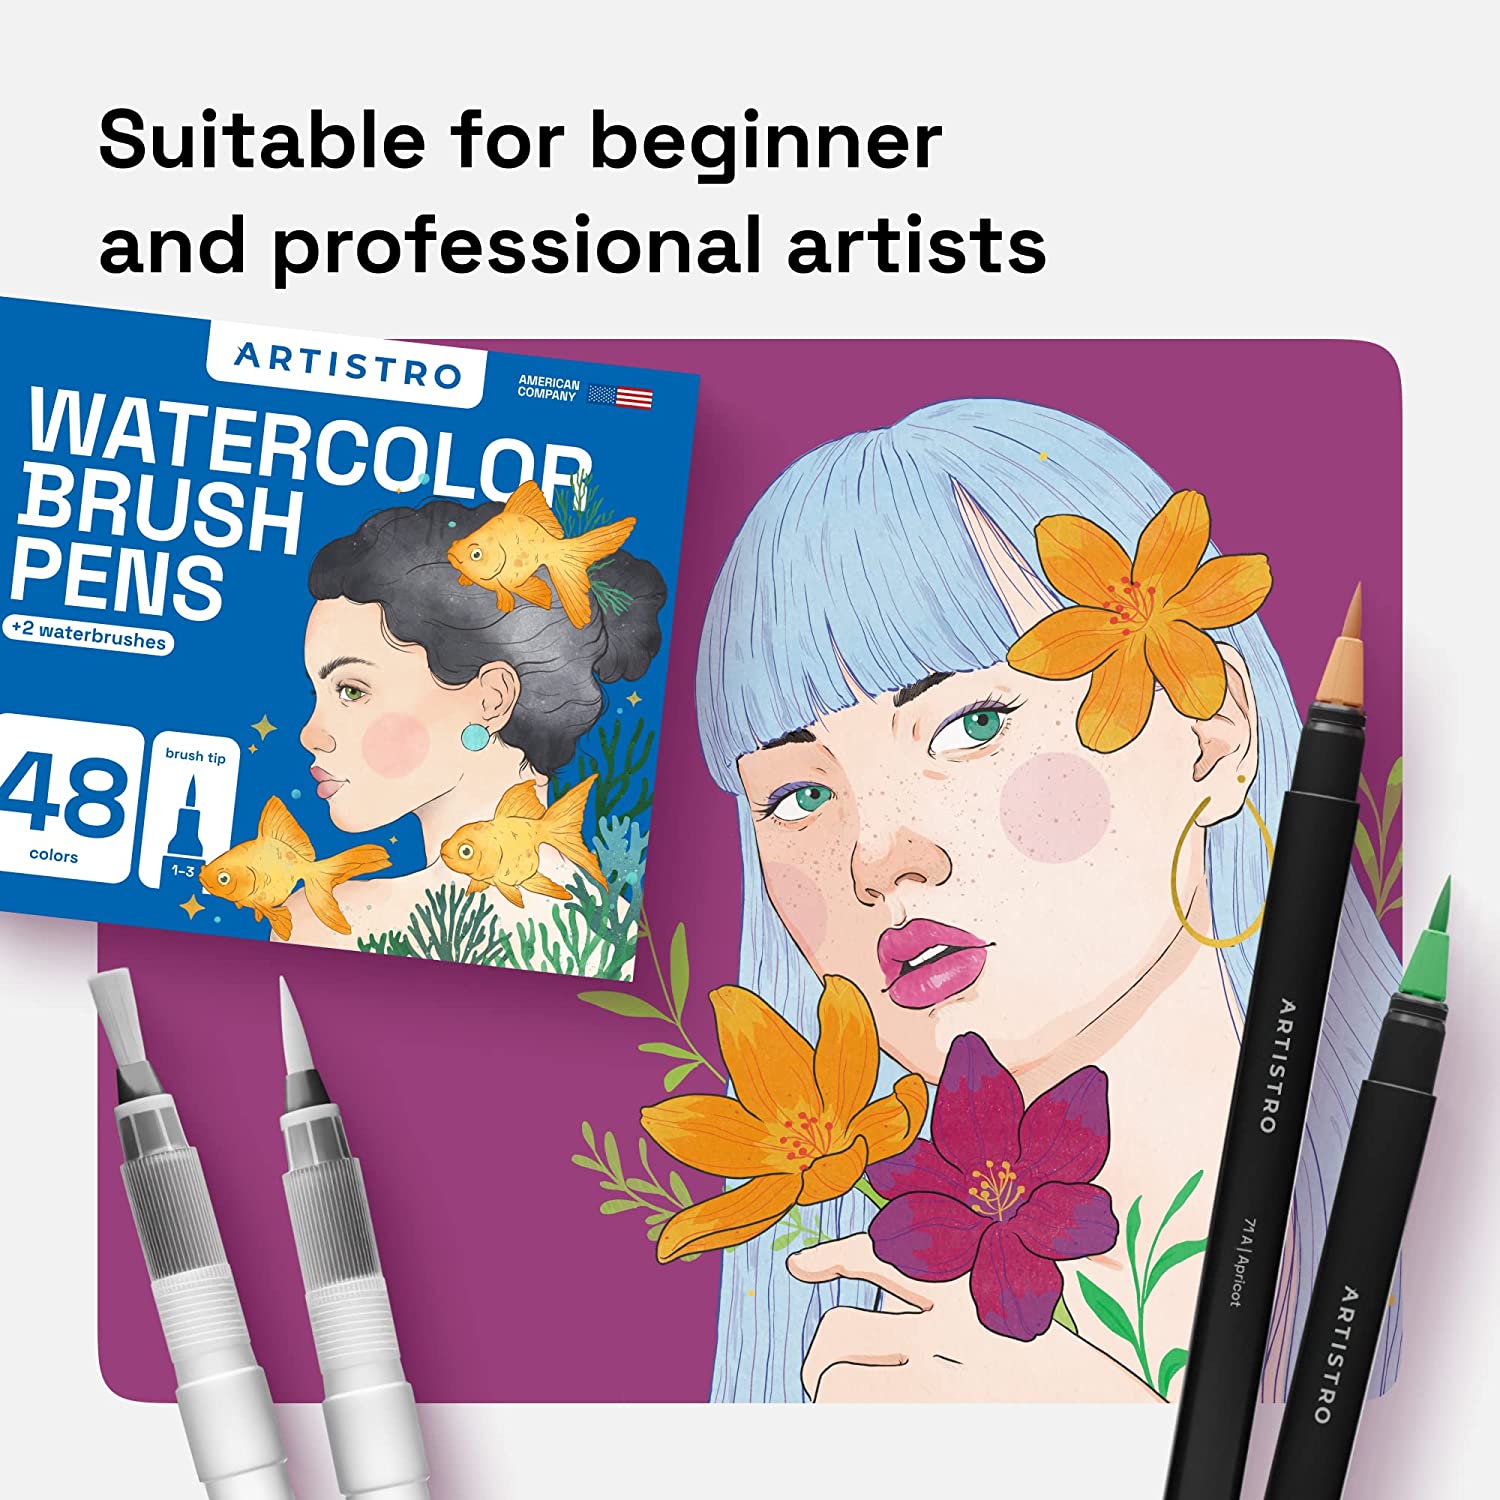 48 watercolor brush pens suitable for beginner and professional artists